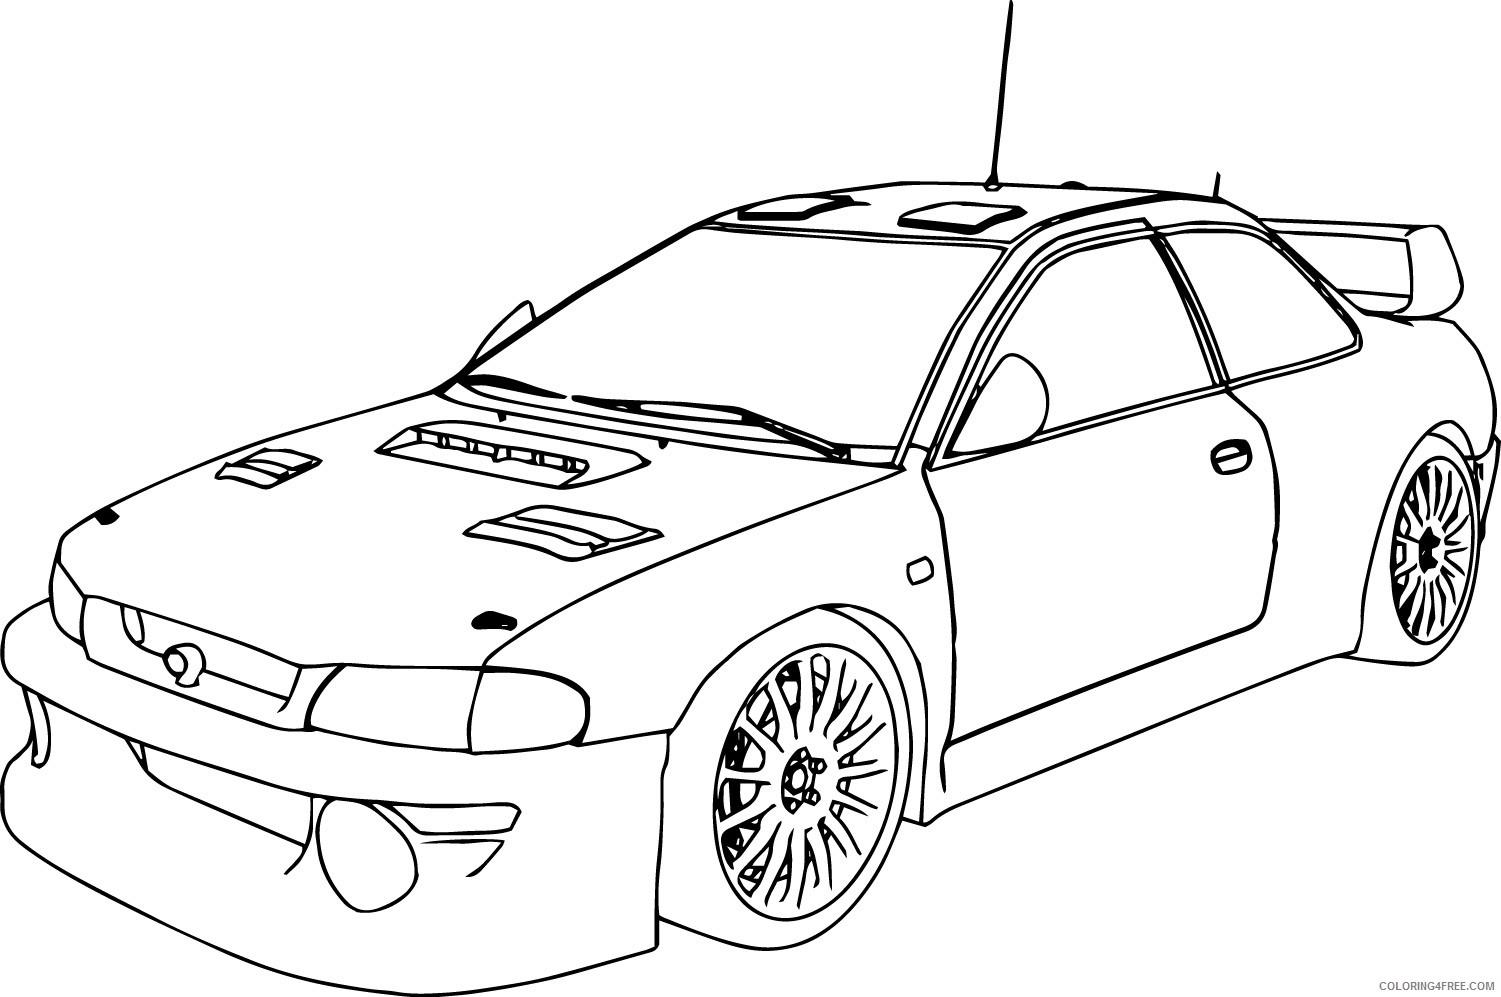 race car coloring pages rally car Coloring4free